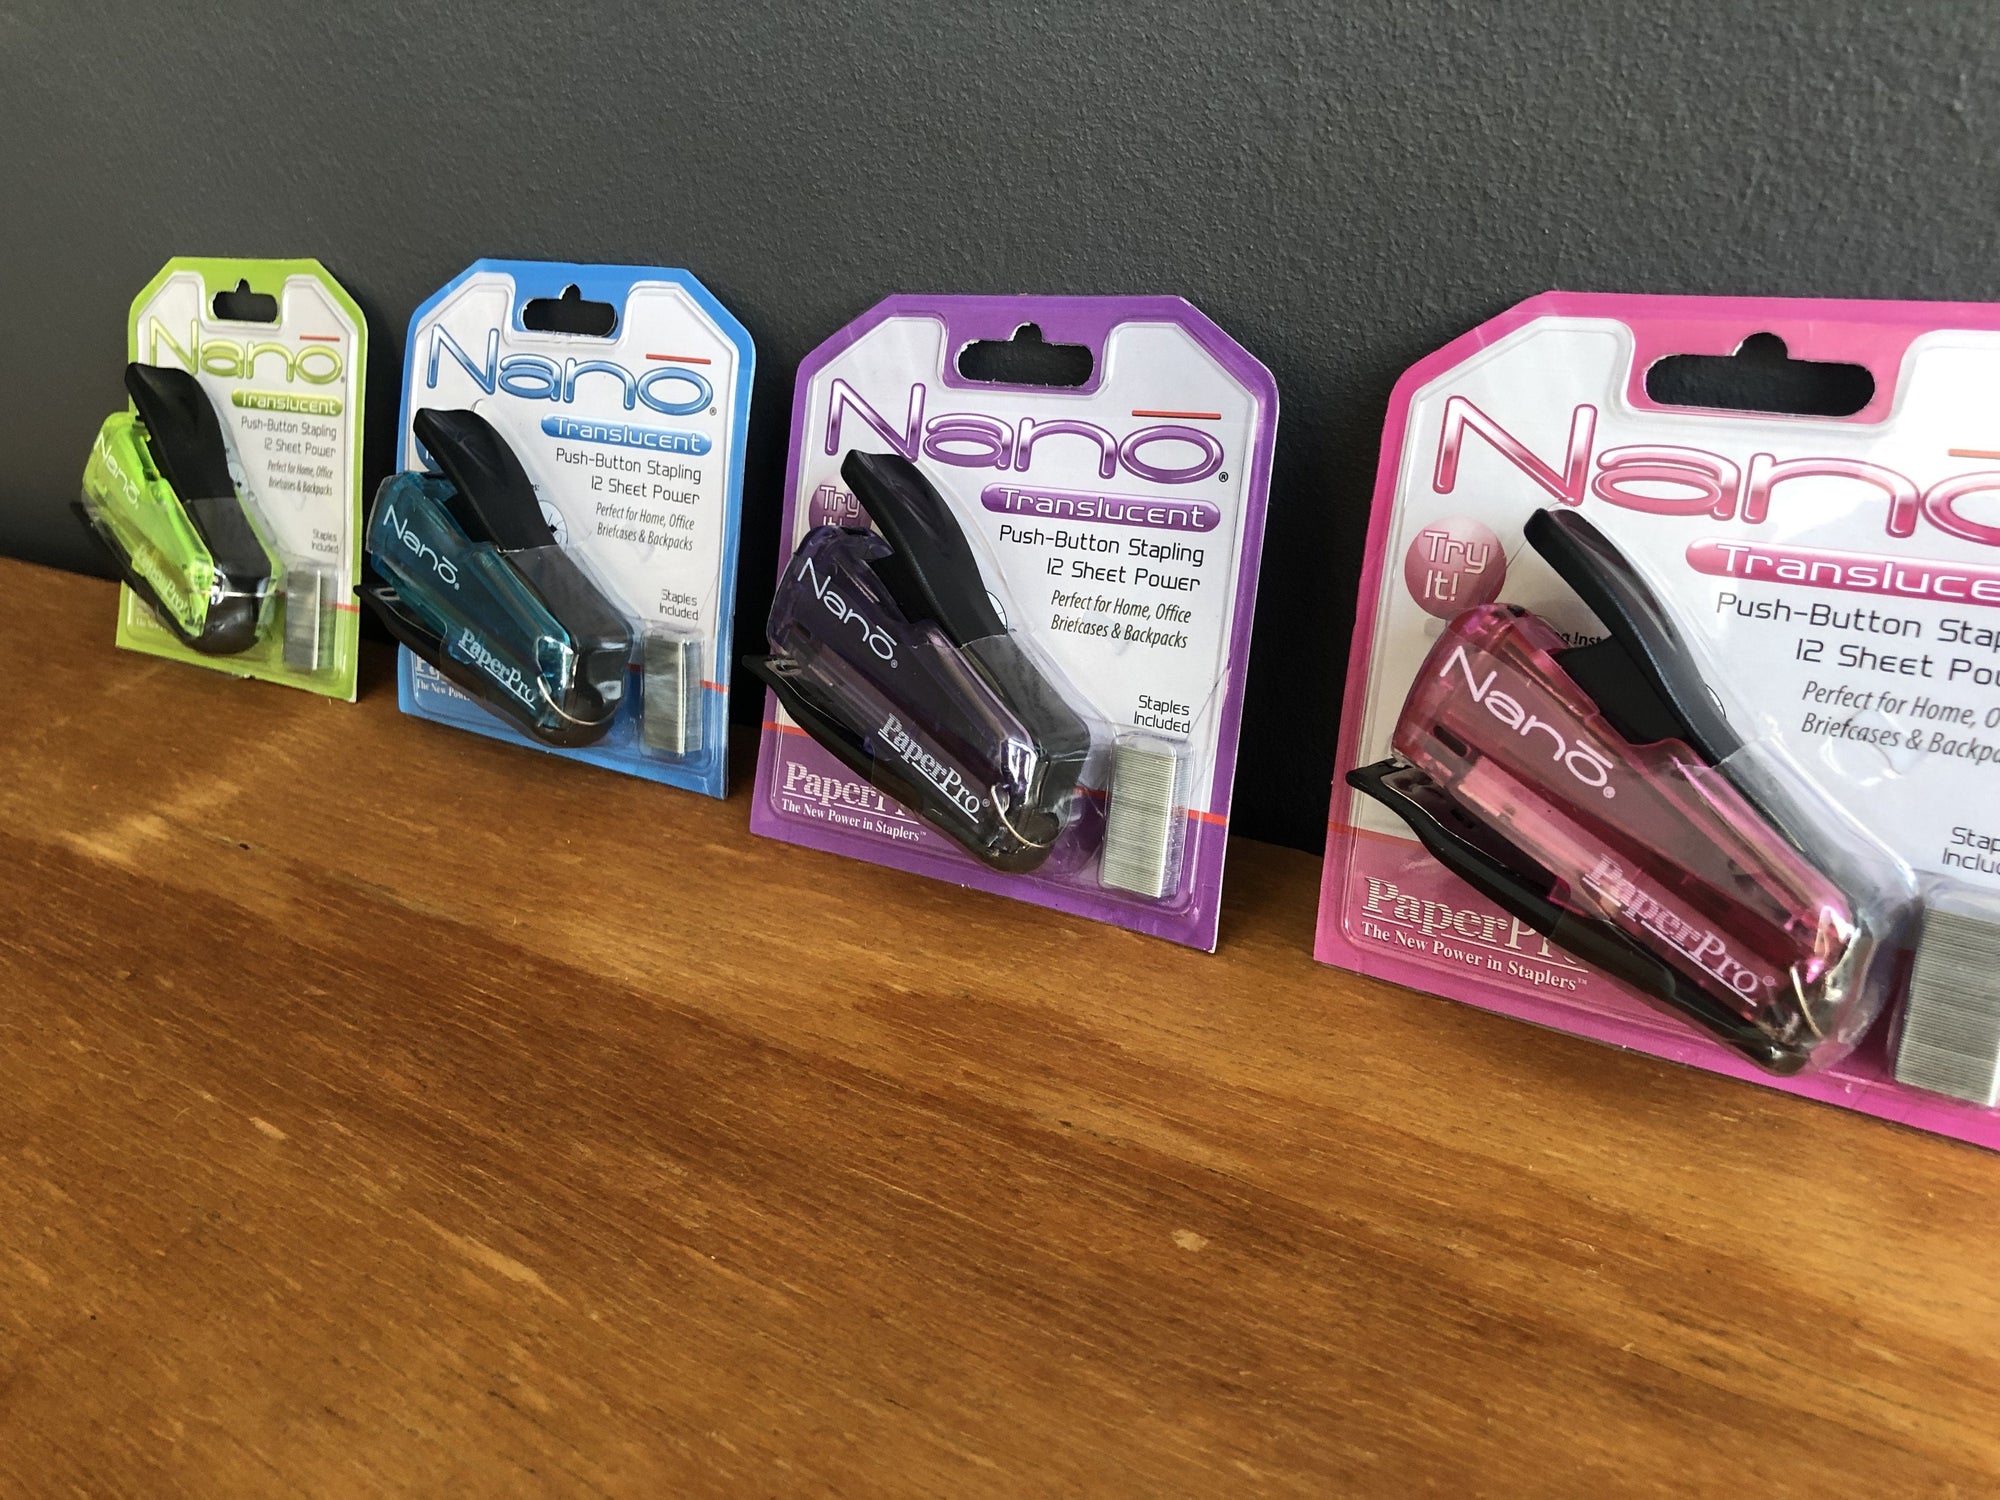 Mini  Multi Colored Staplers Sold Separately - 2ndhandwarehouse.com